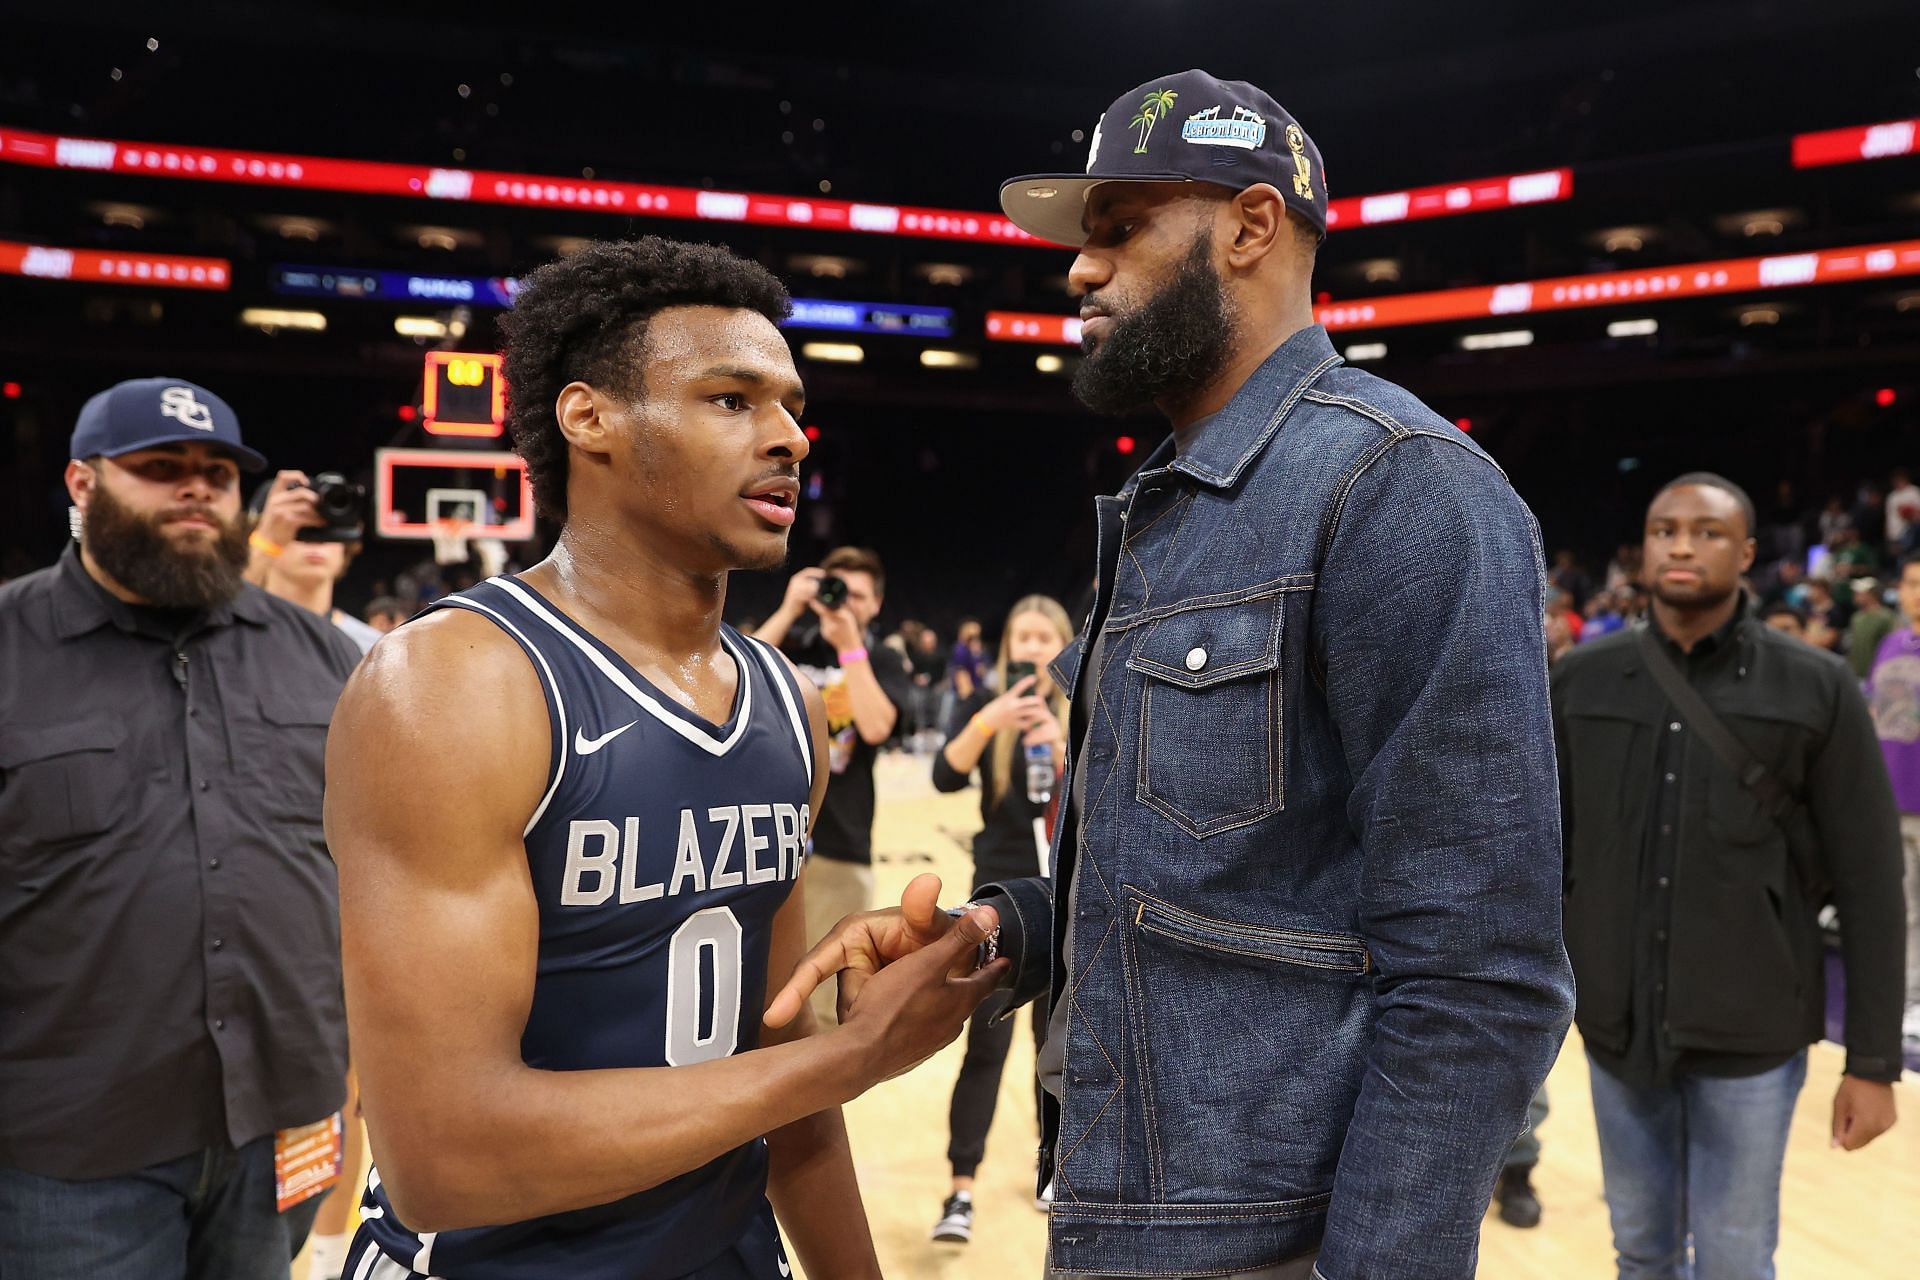 Bronny James of the Sierra Canyon Trailblazers is greeted by his father and NBA player LeBron James